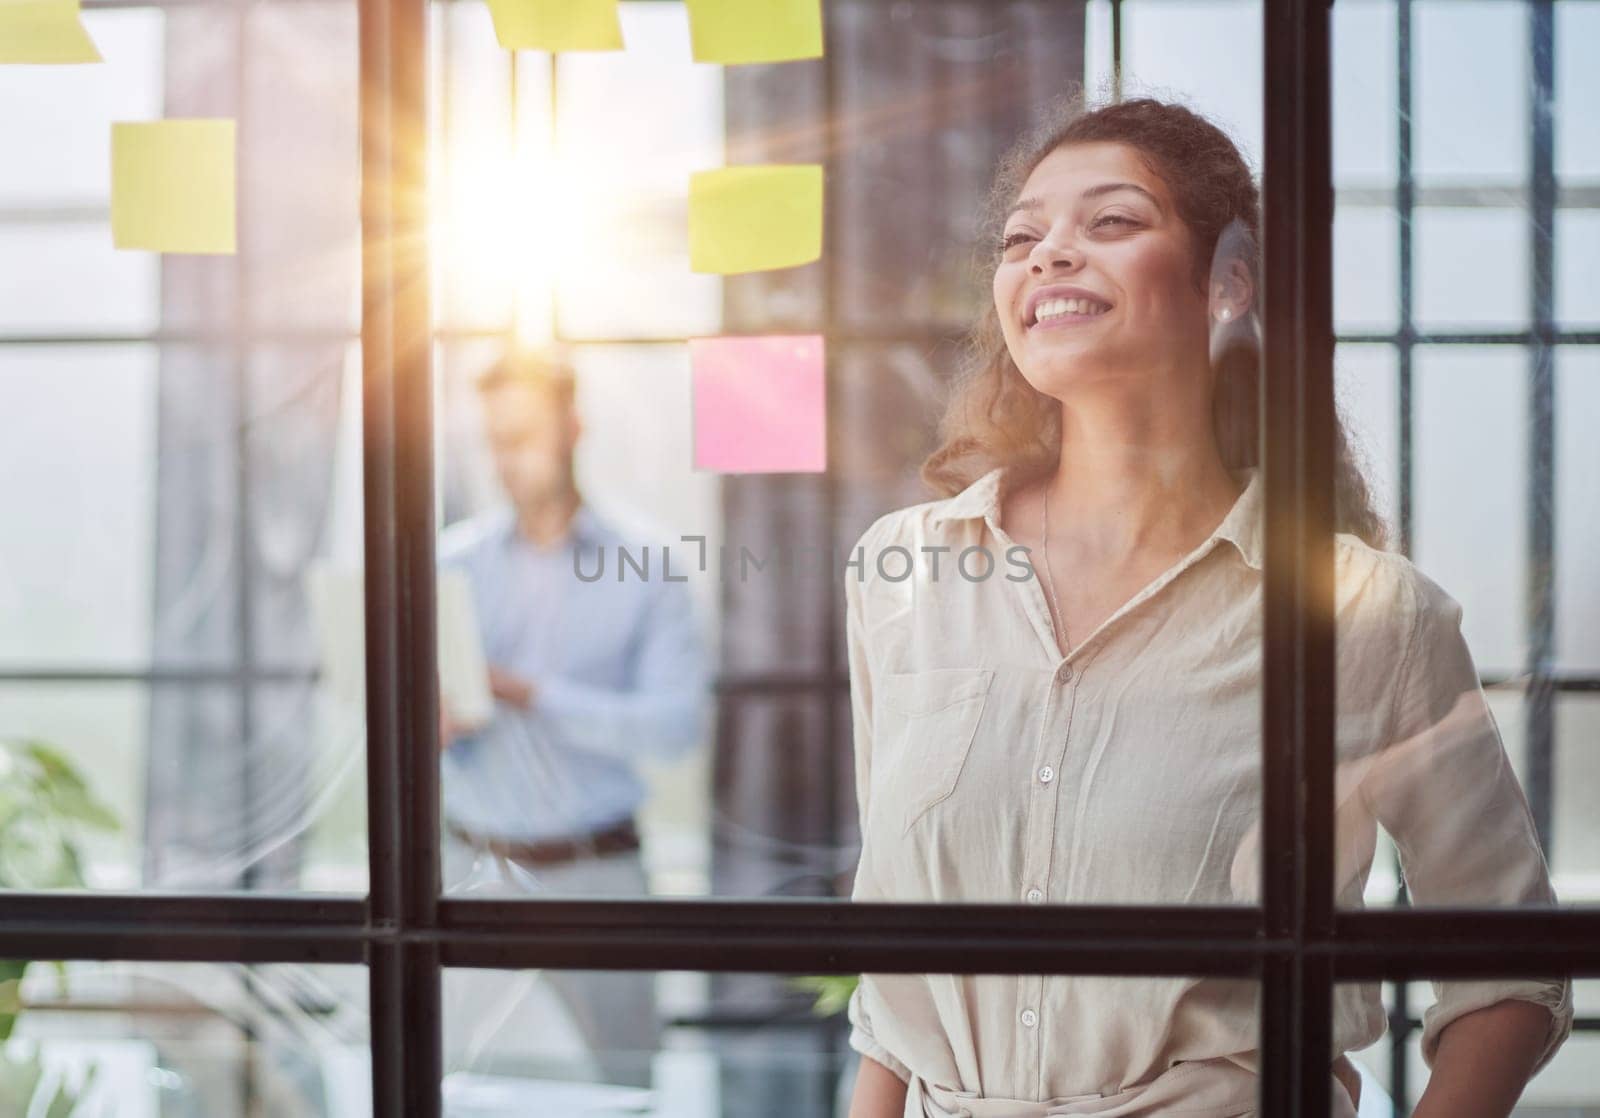 Bringing her vision to life. Shot of a confident businesswoman presenting an idea to her colleague using adhesive notes on a glass wall in the office.